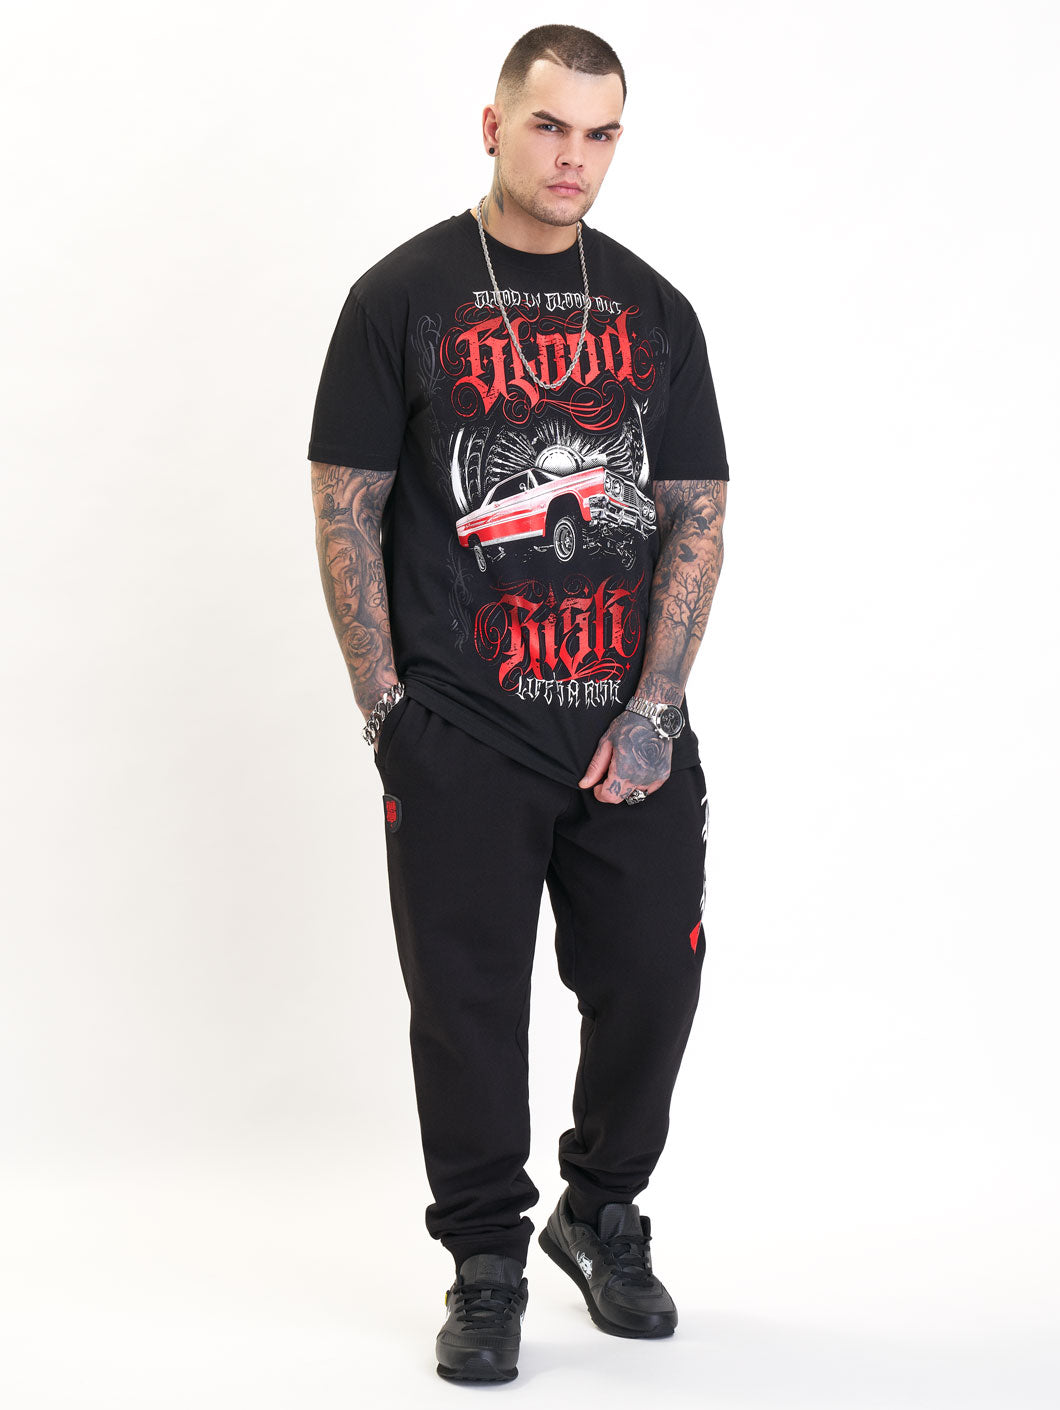 Blood In Blood Out Tavos T-Shirt - 2